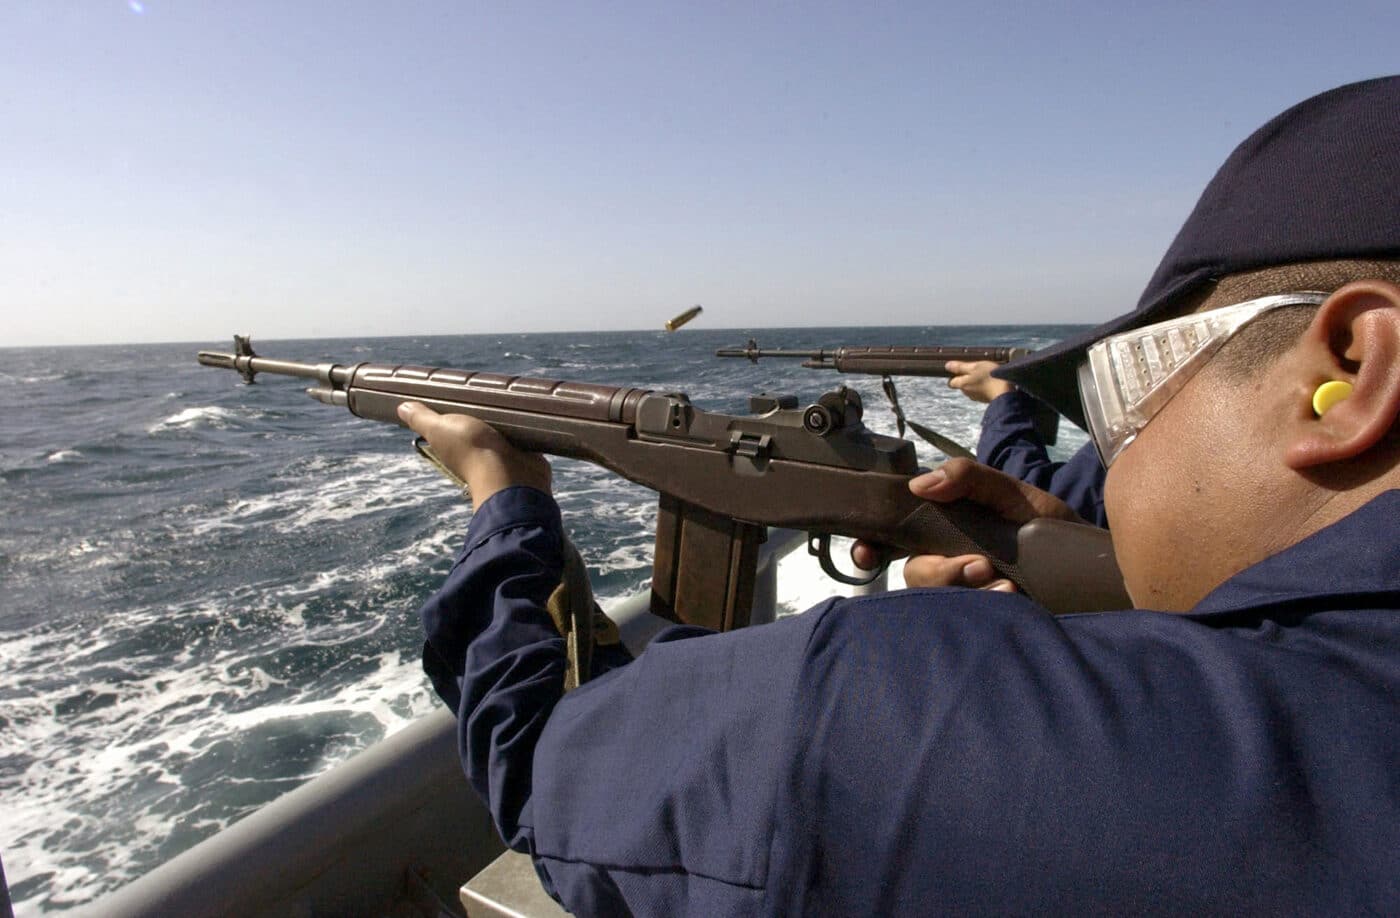 Mineman 3rd Class Arthur Cobles fires an M14 rifle during a weapons qualification aboard the USS Ardent.